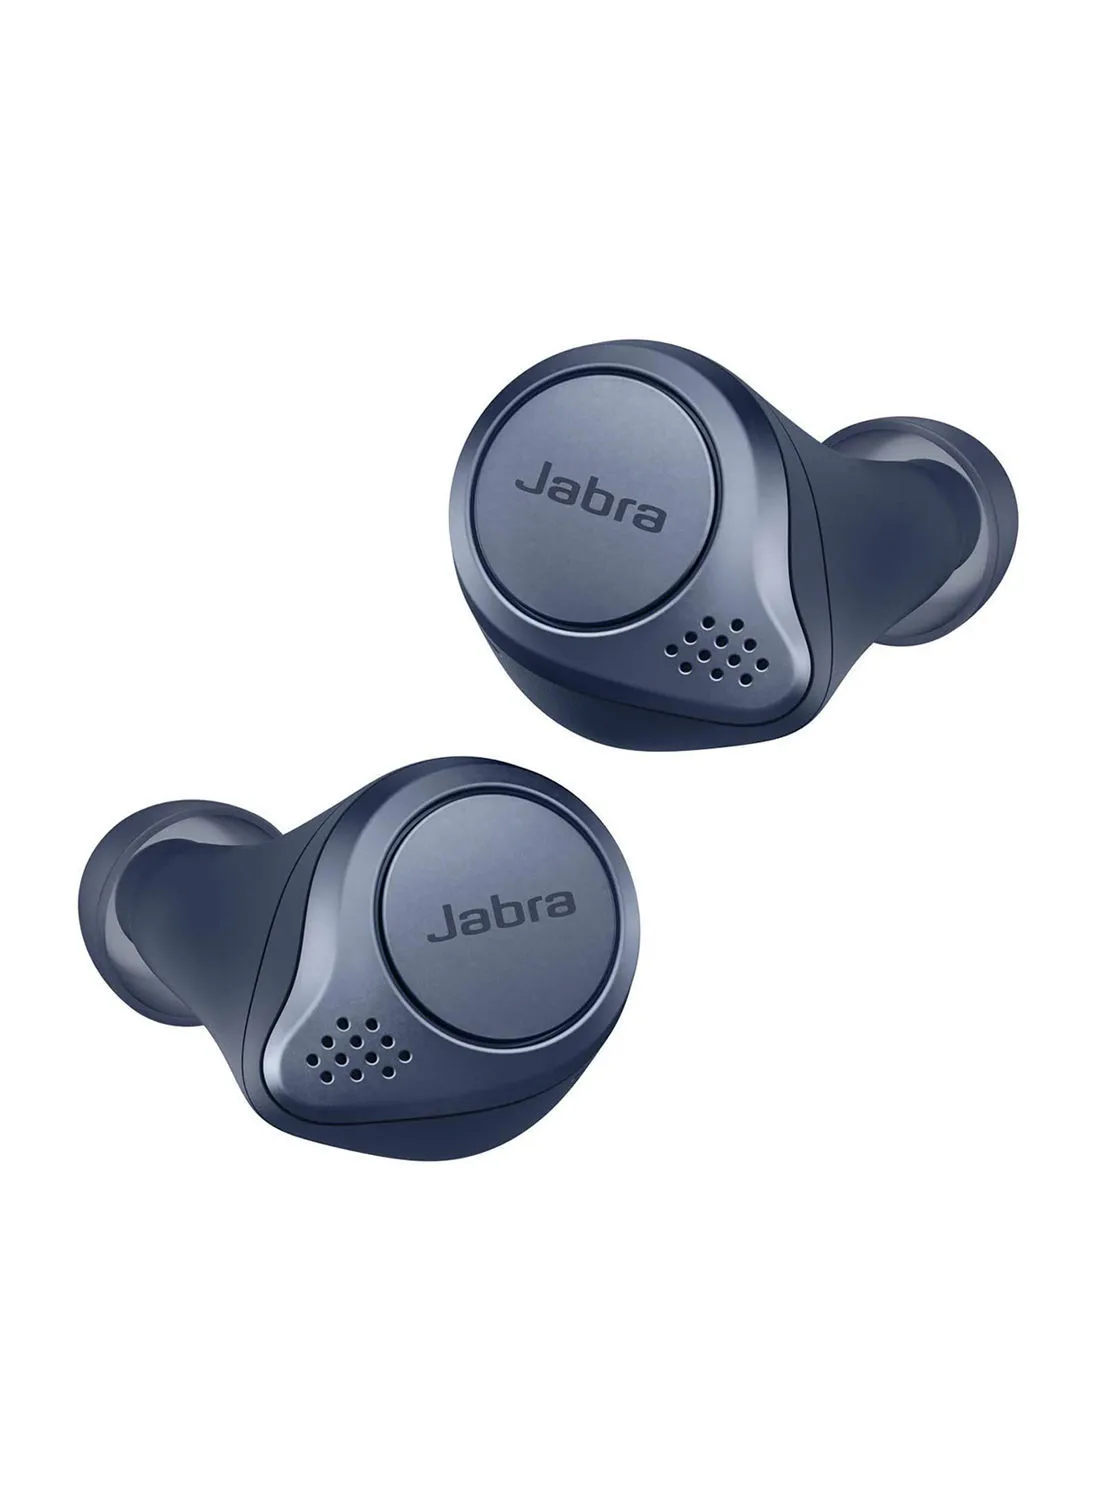 Jabra Elite Active 75t Earbuds - Active Noise Cancelling True Wireless Sports Earphones With Long Battery Life For Calls And Music Navy